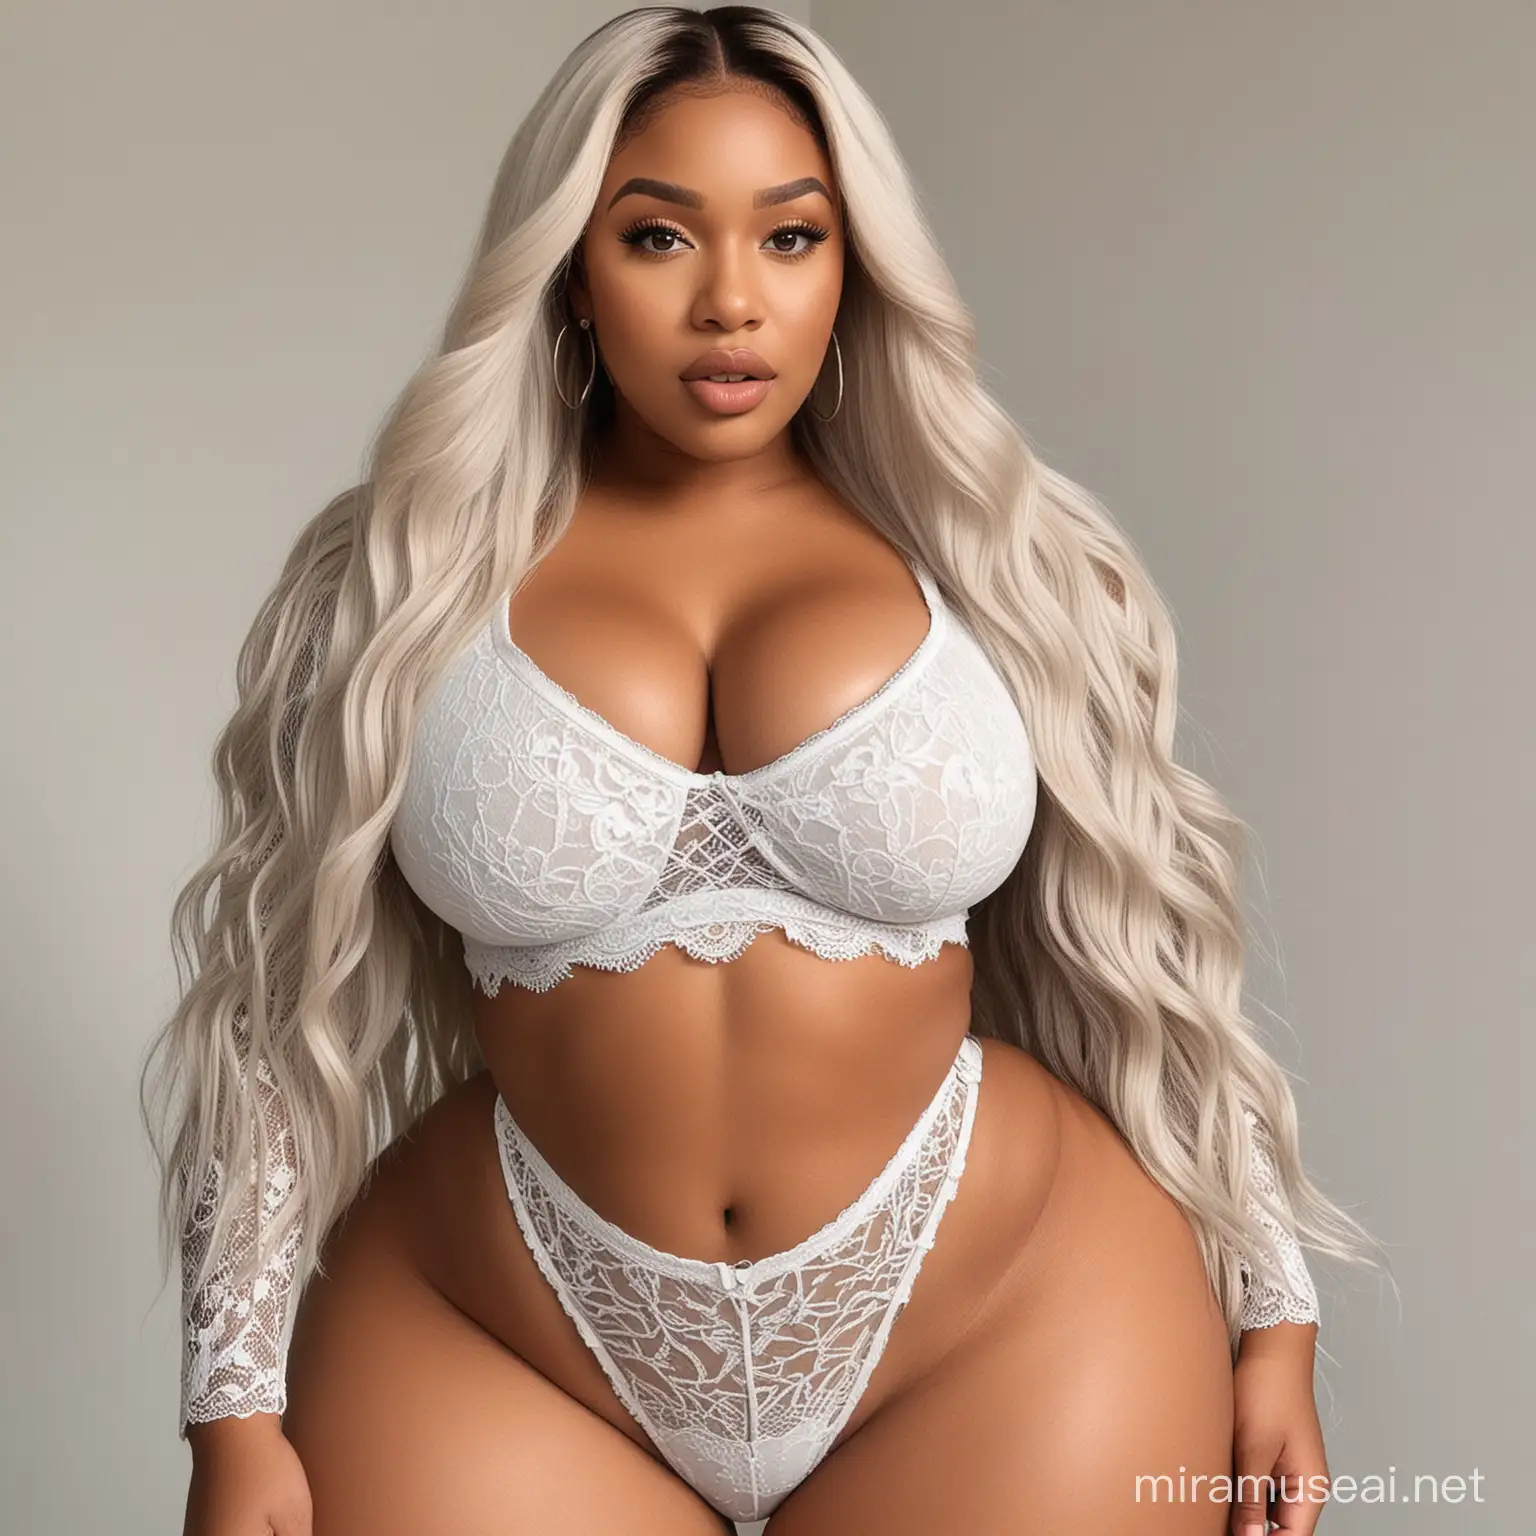 Sultry PlusSize South African Woman in Silver Thirst Trap Look